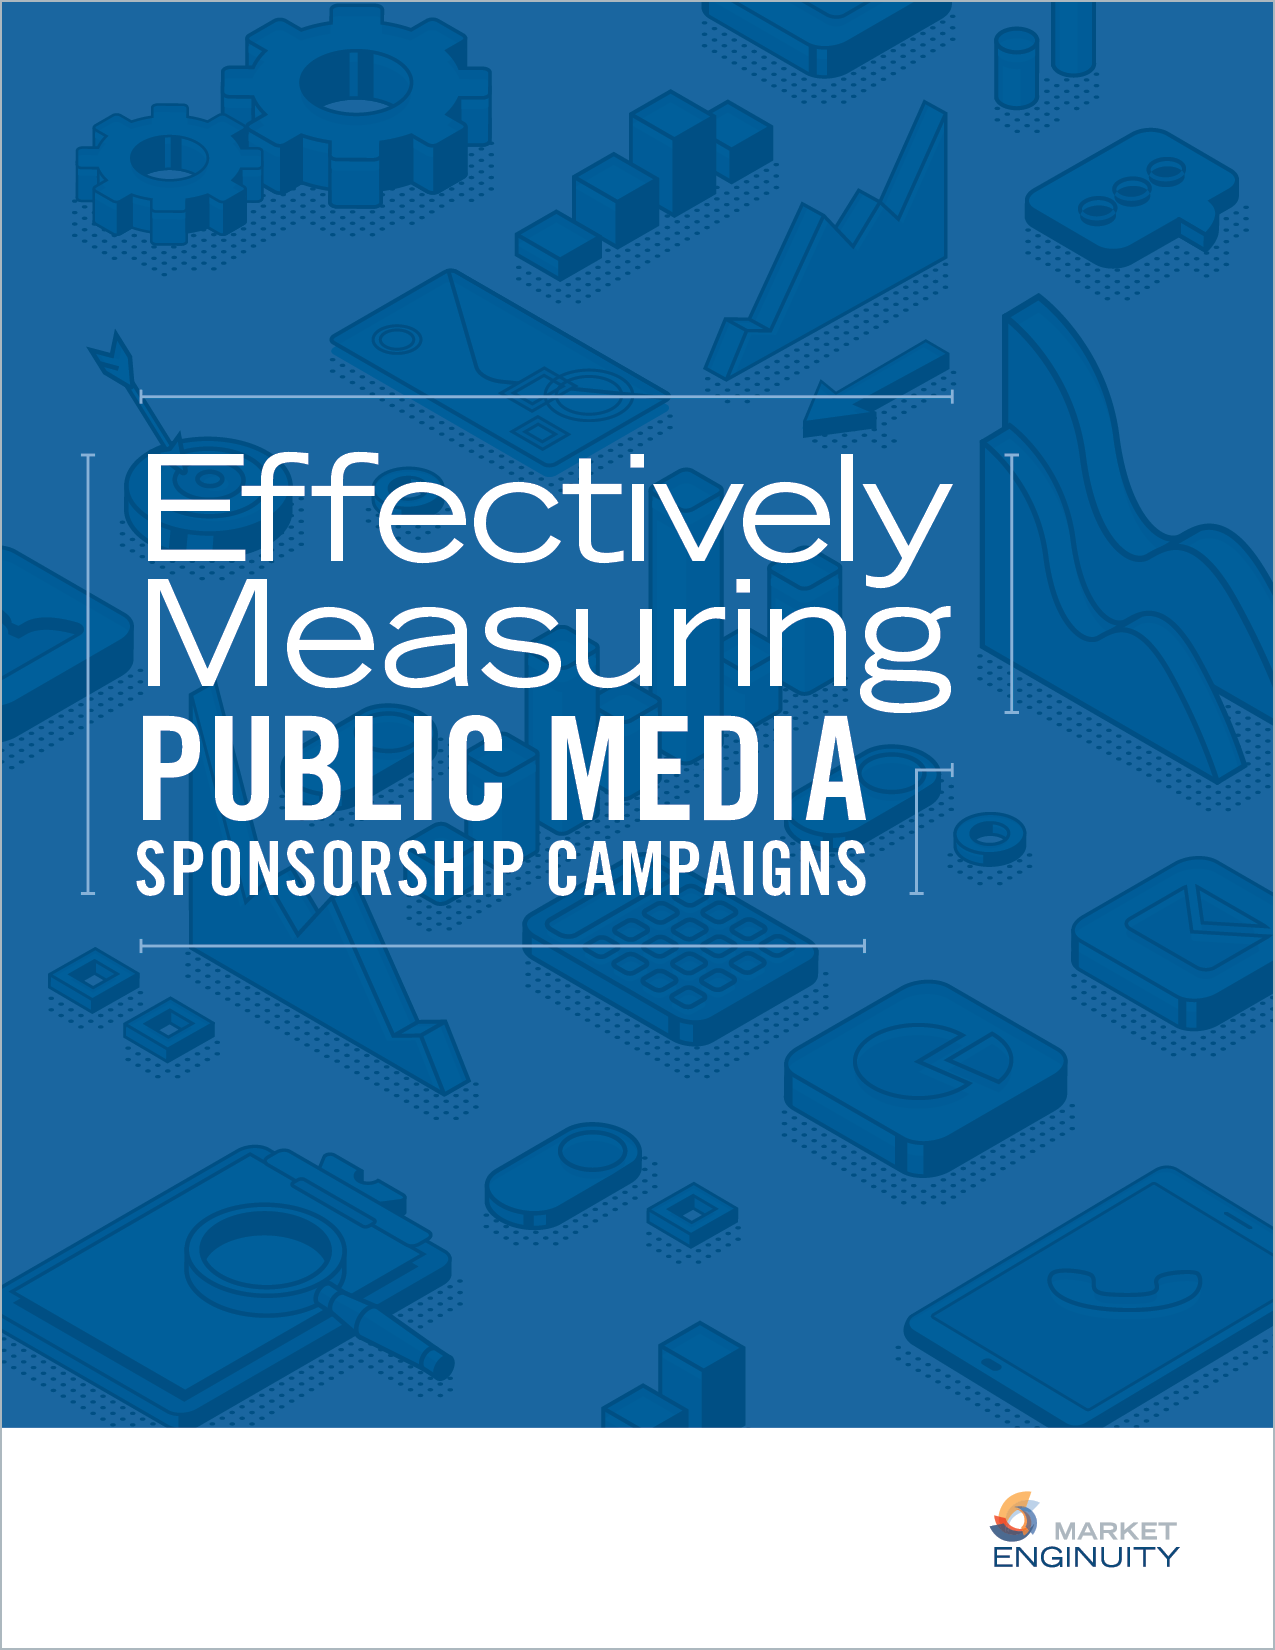 ENG_Effectively Measuring Public Media Sponsorship Campaigns_040422